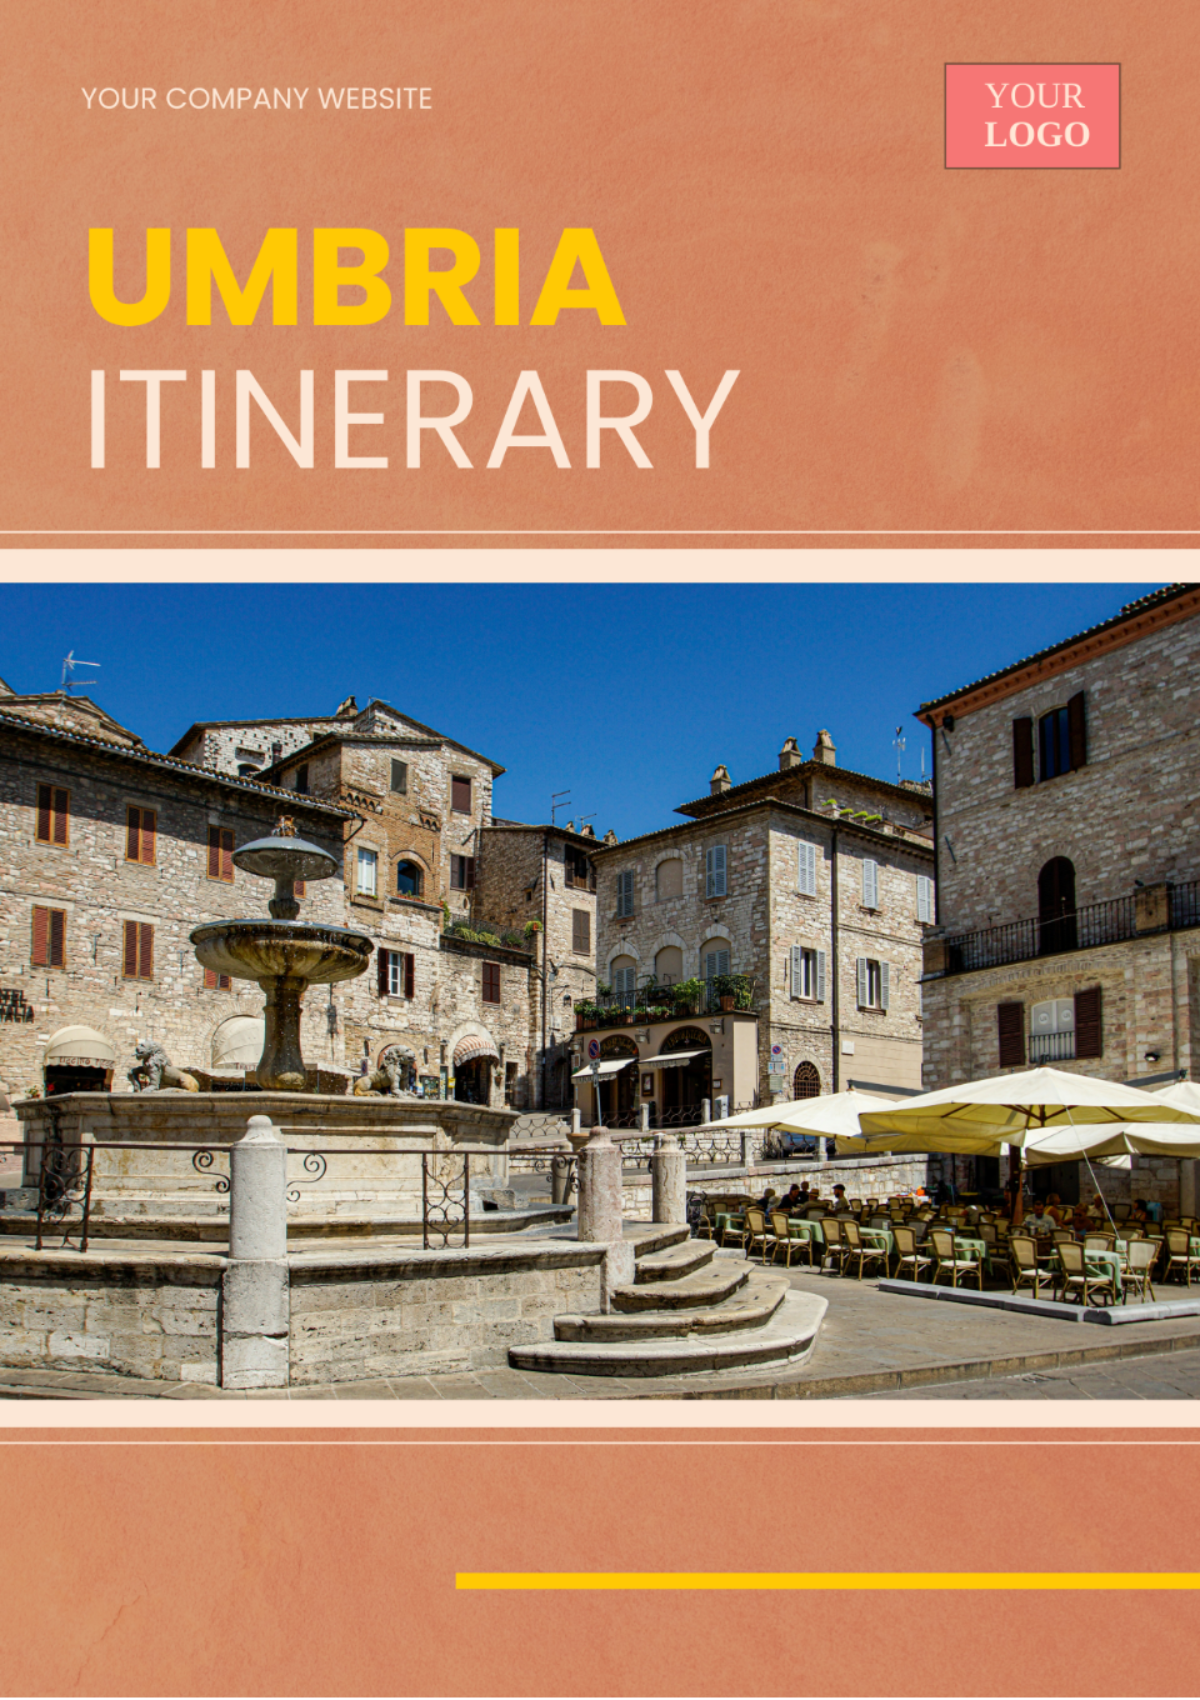 Umbria Itinerary Template